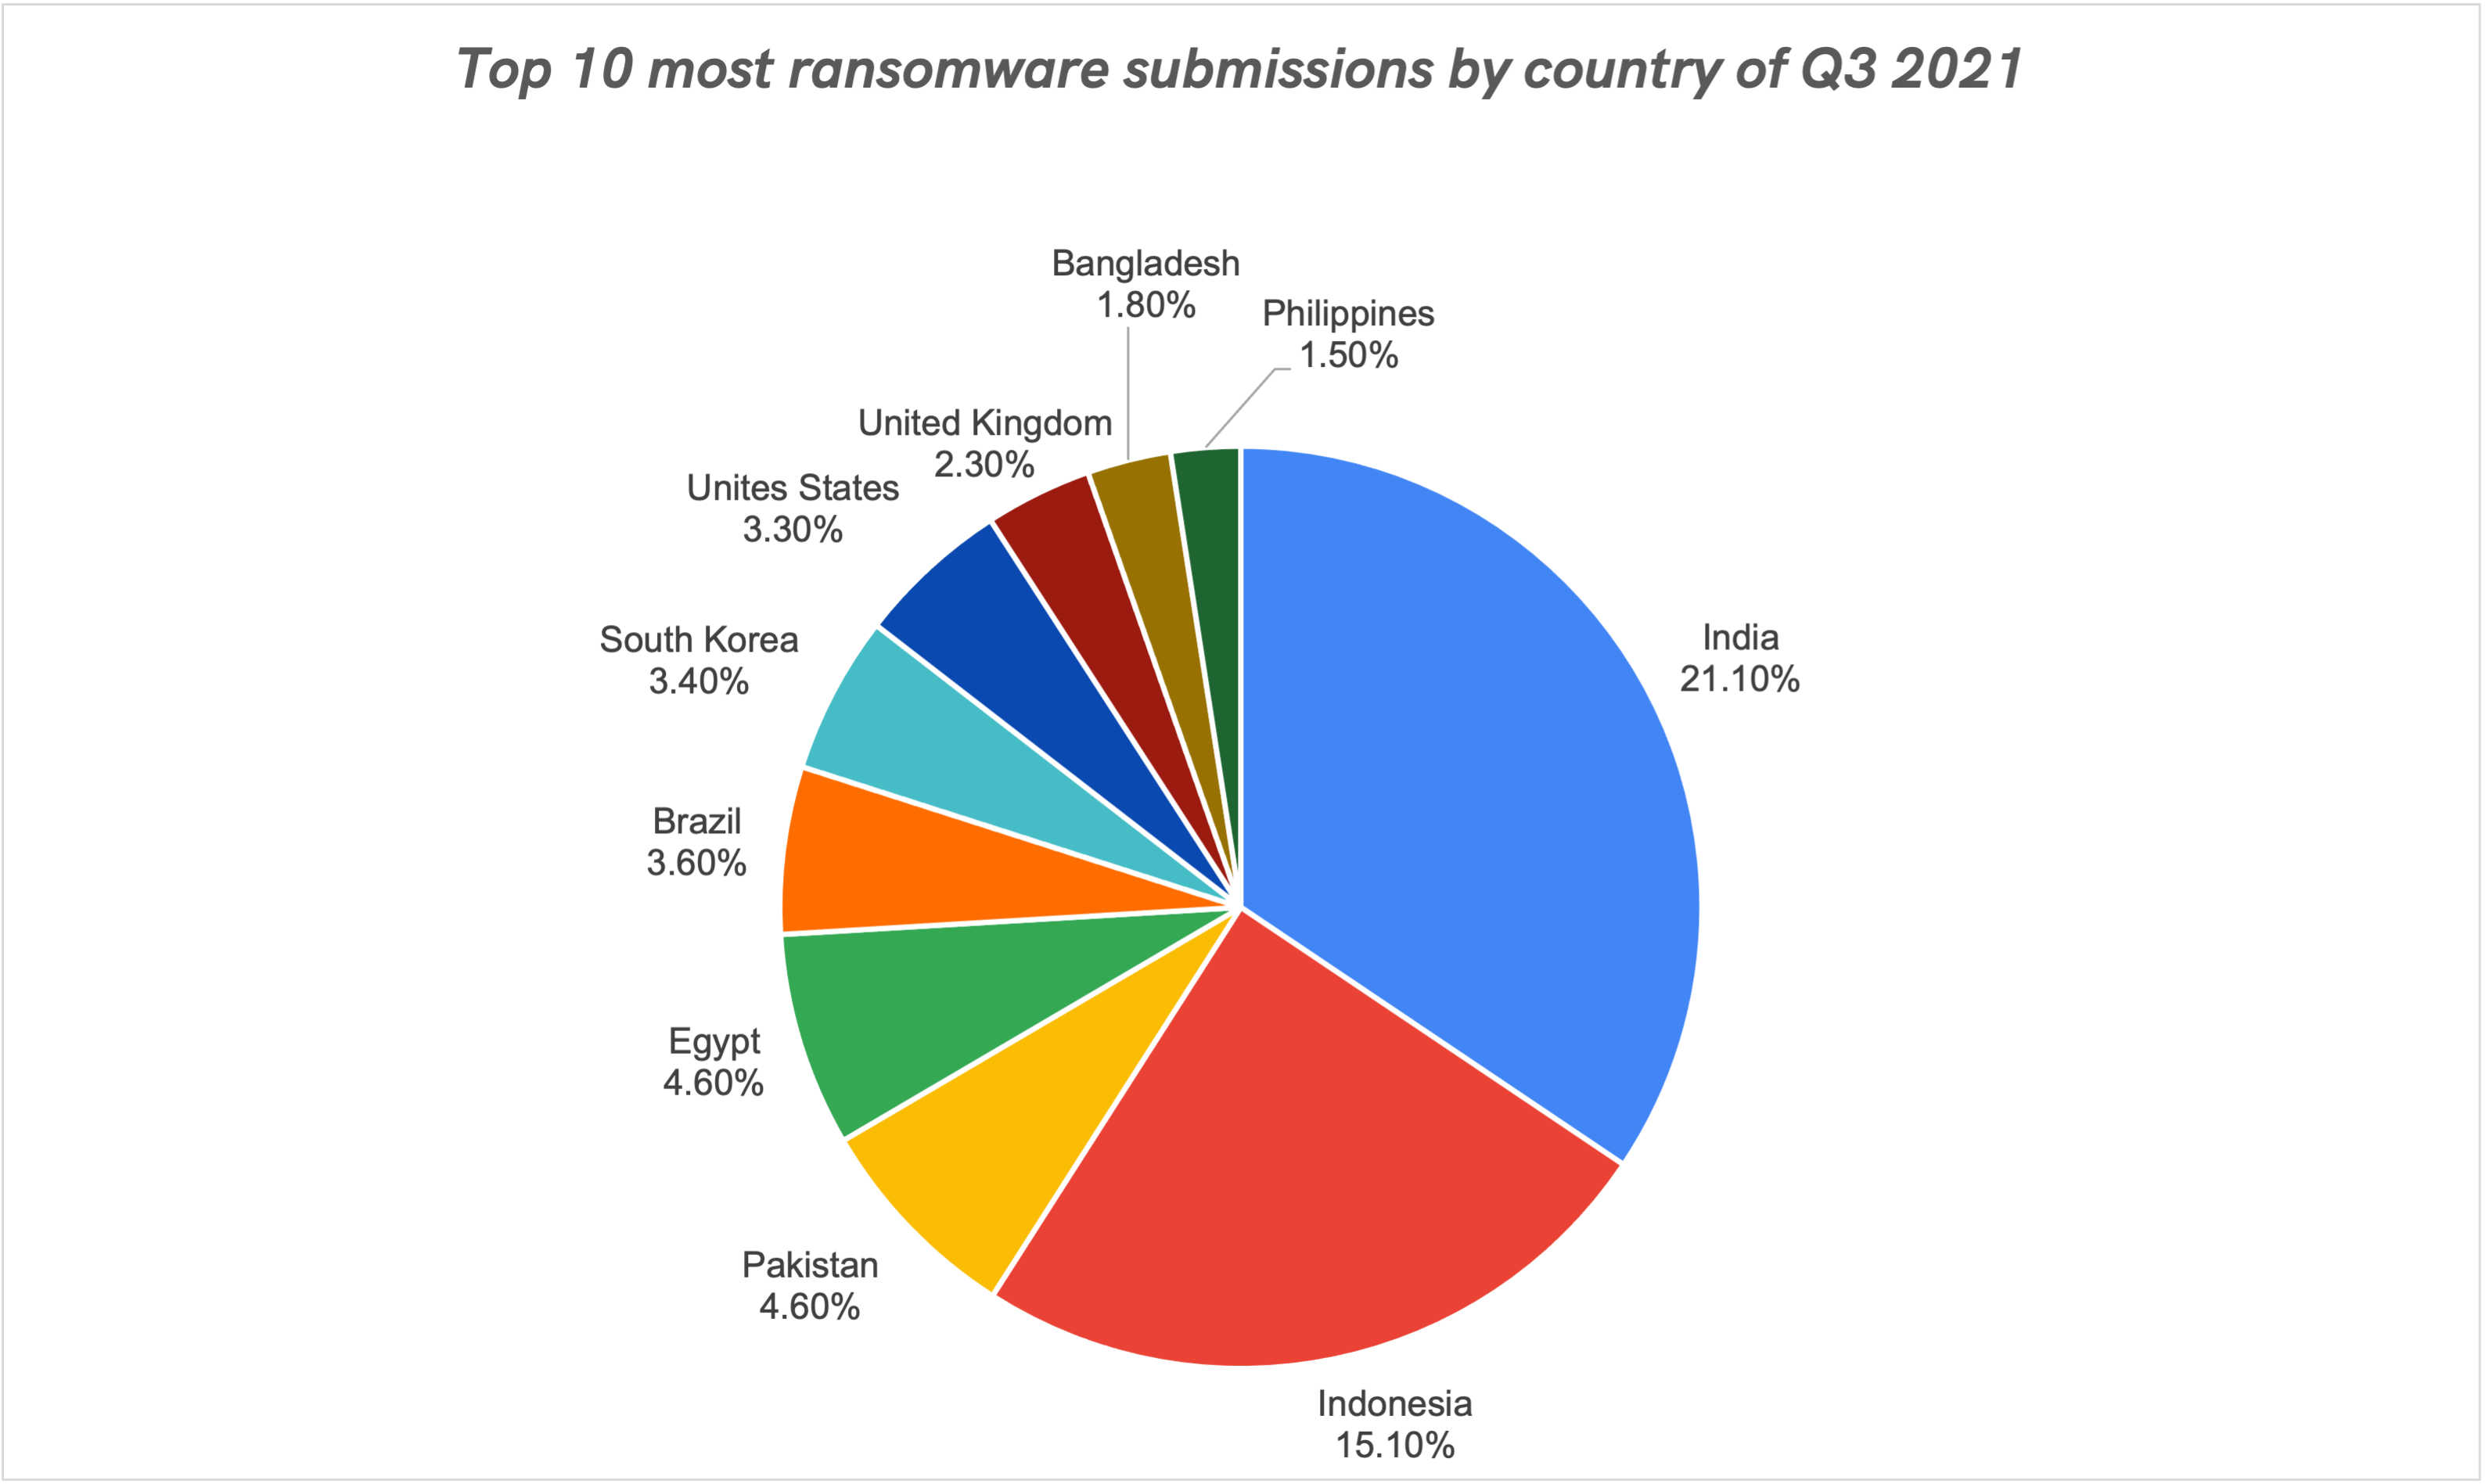 Top 10 most ransomware submissions by country of Q3 2021